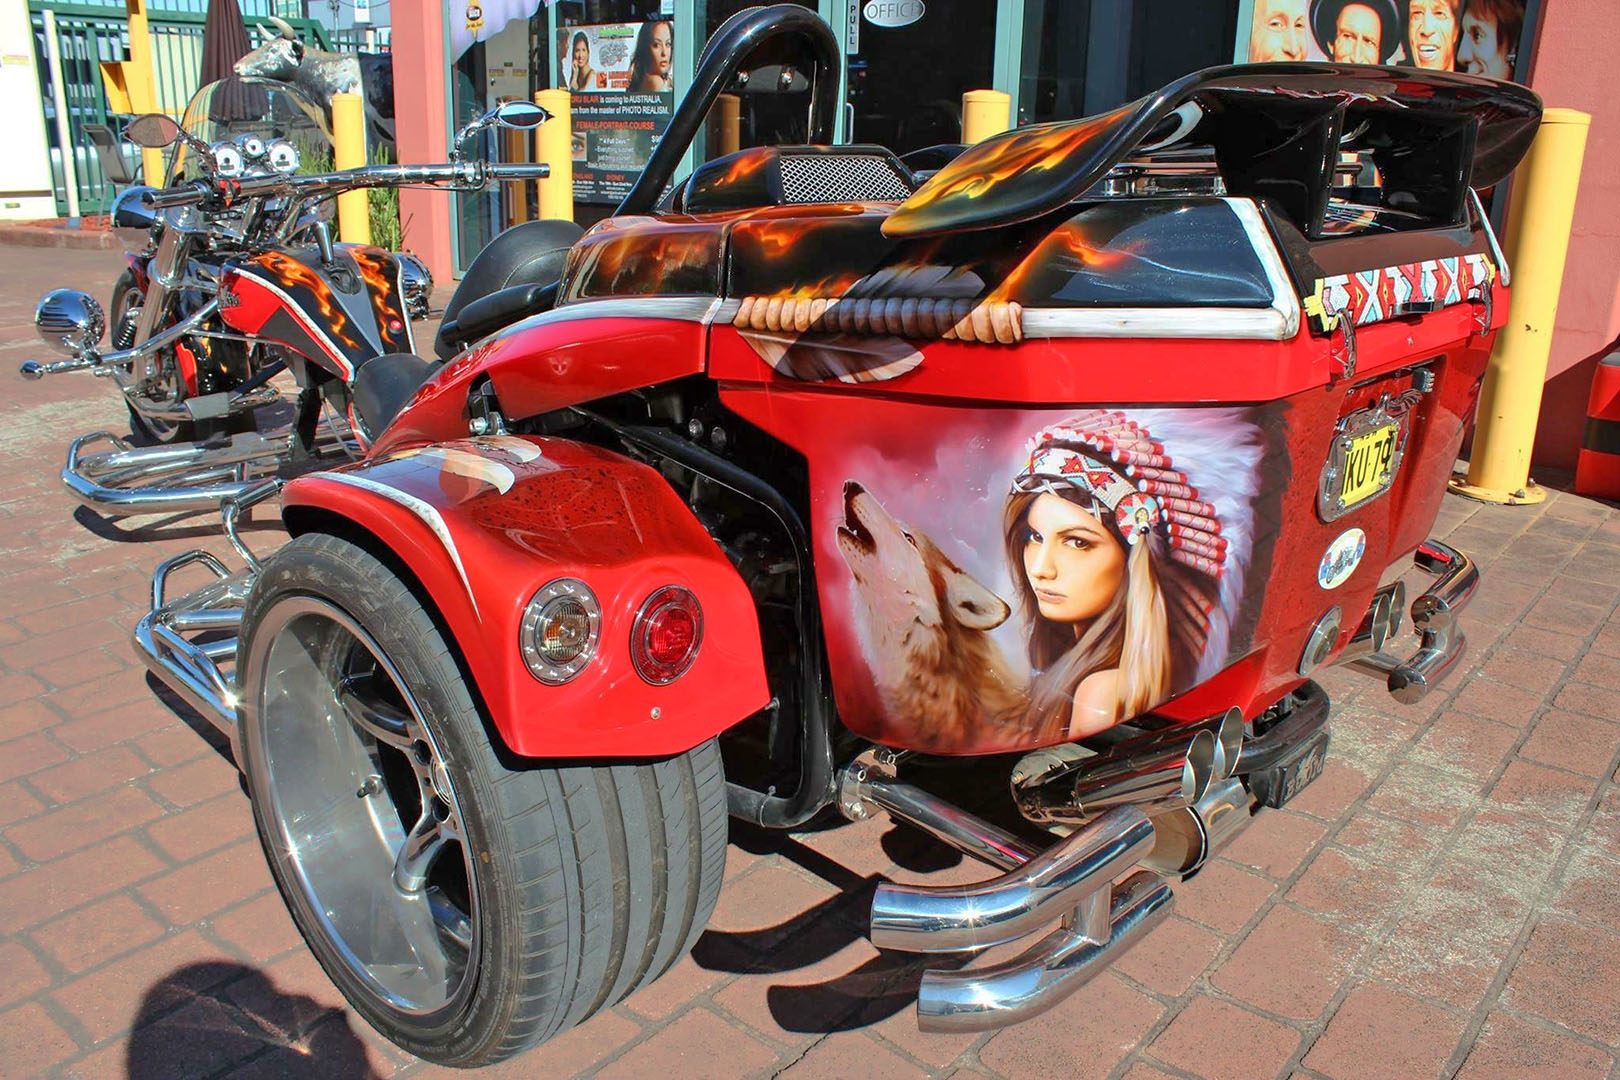 Trike - Indian Themed